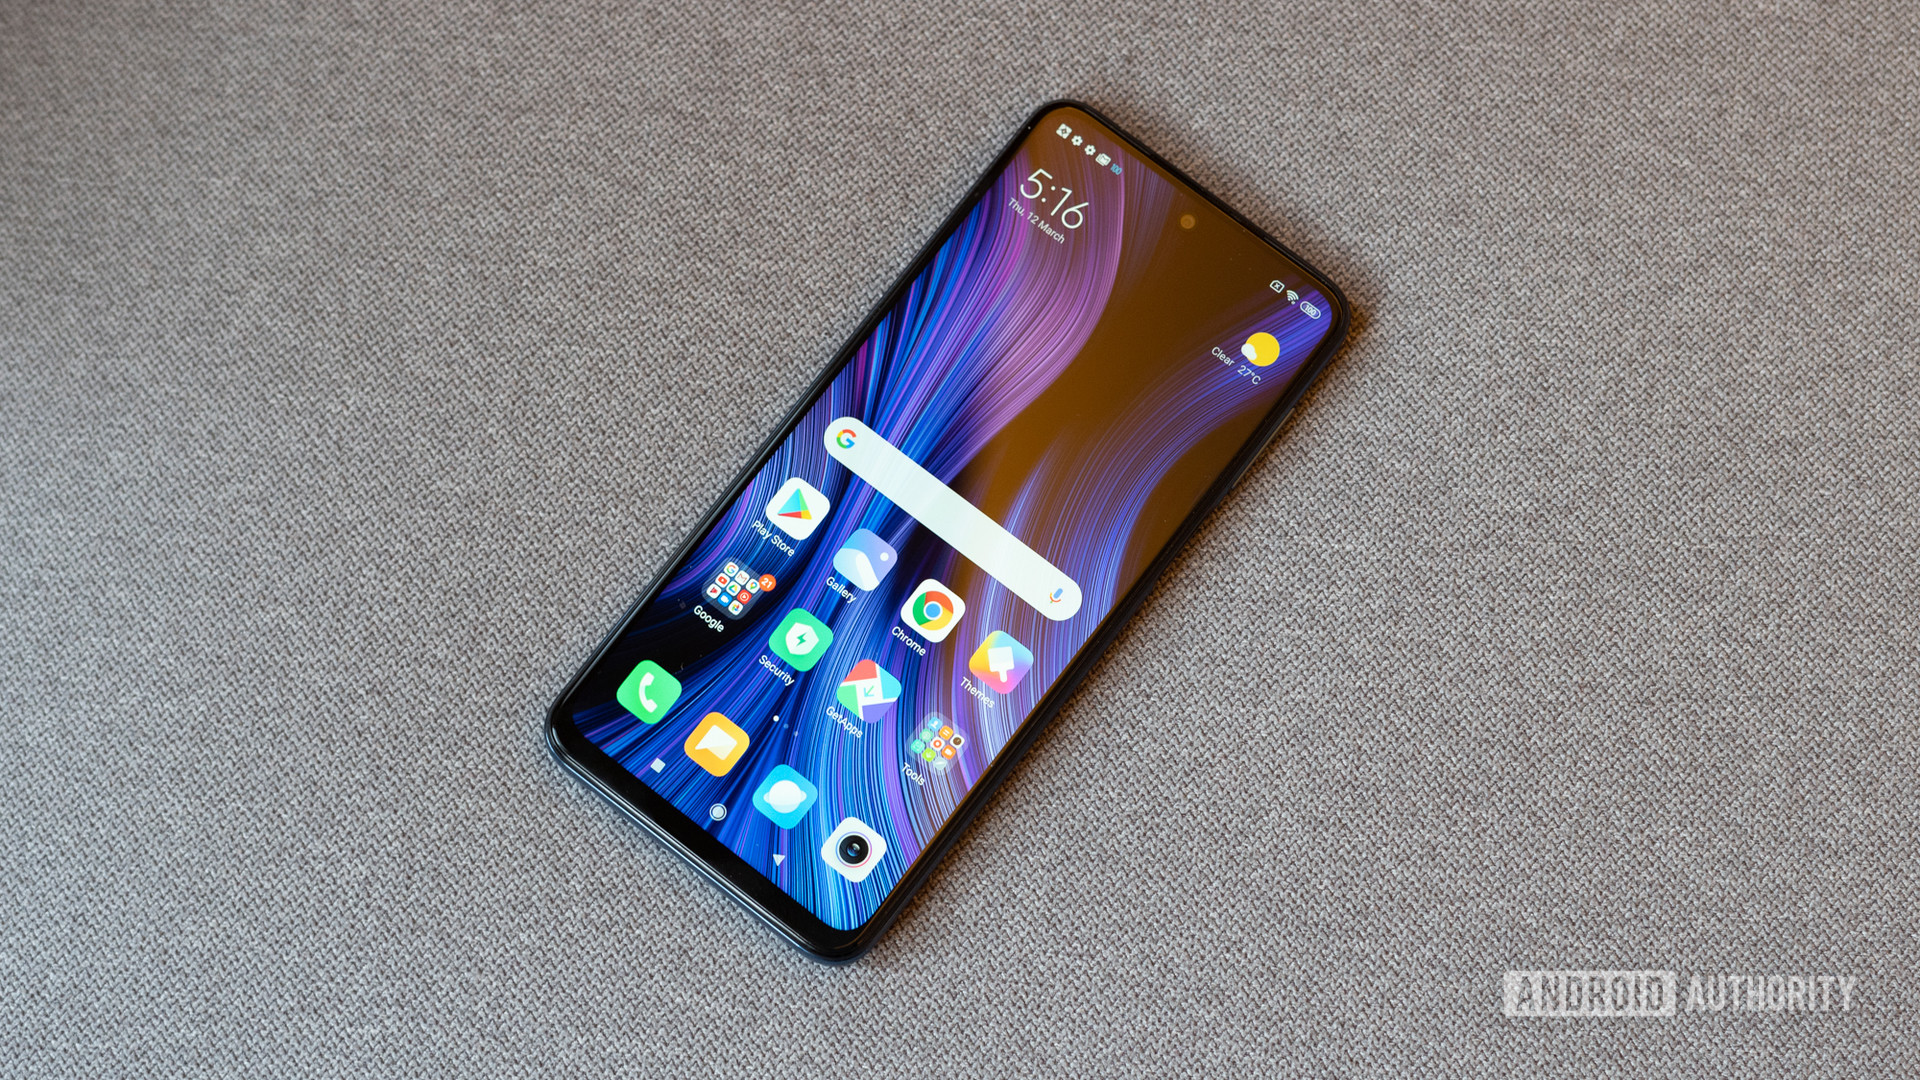 Redmi Note 9 Pro profile shot with icons